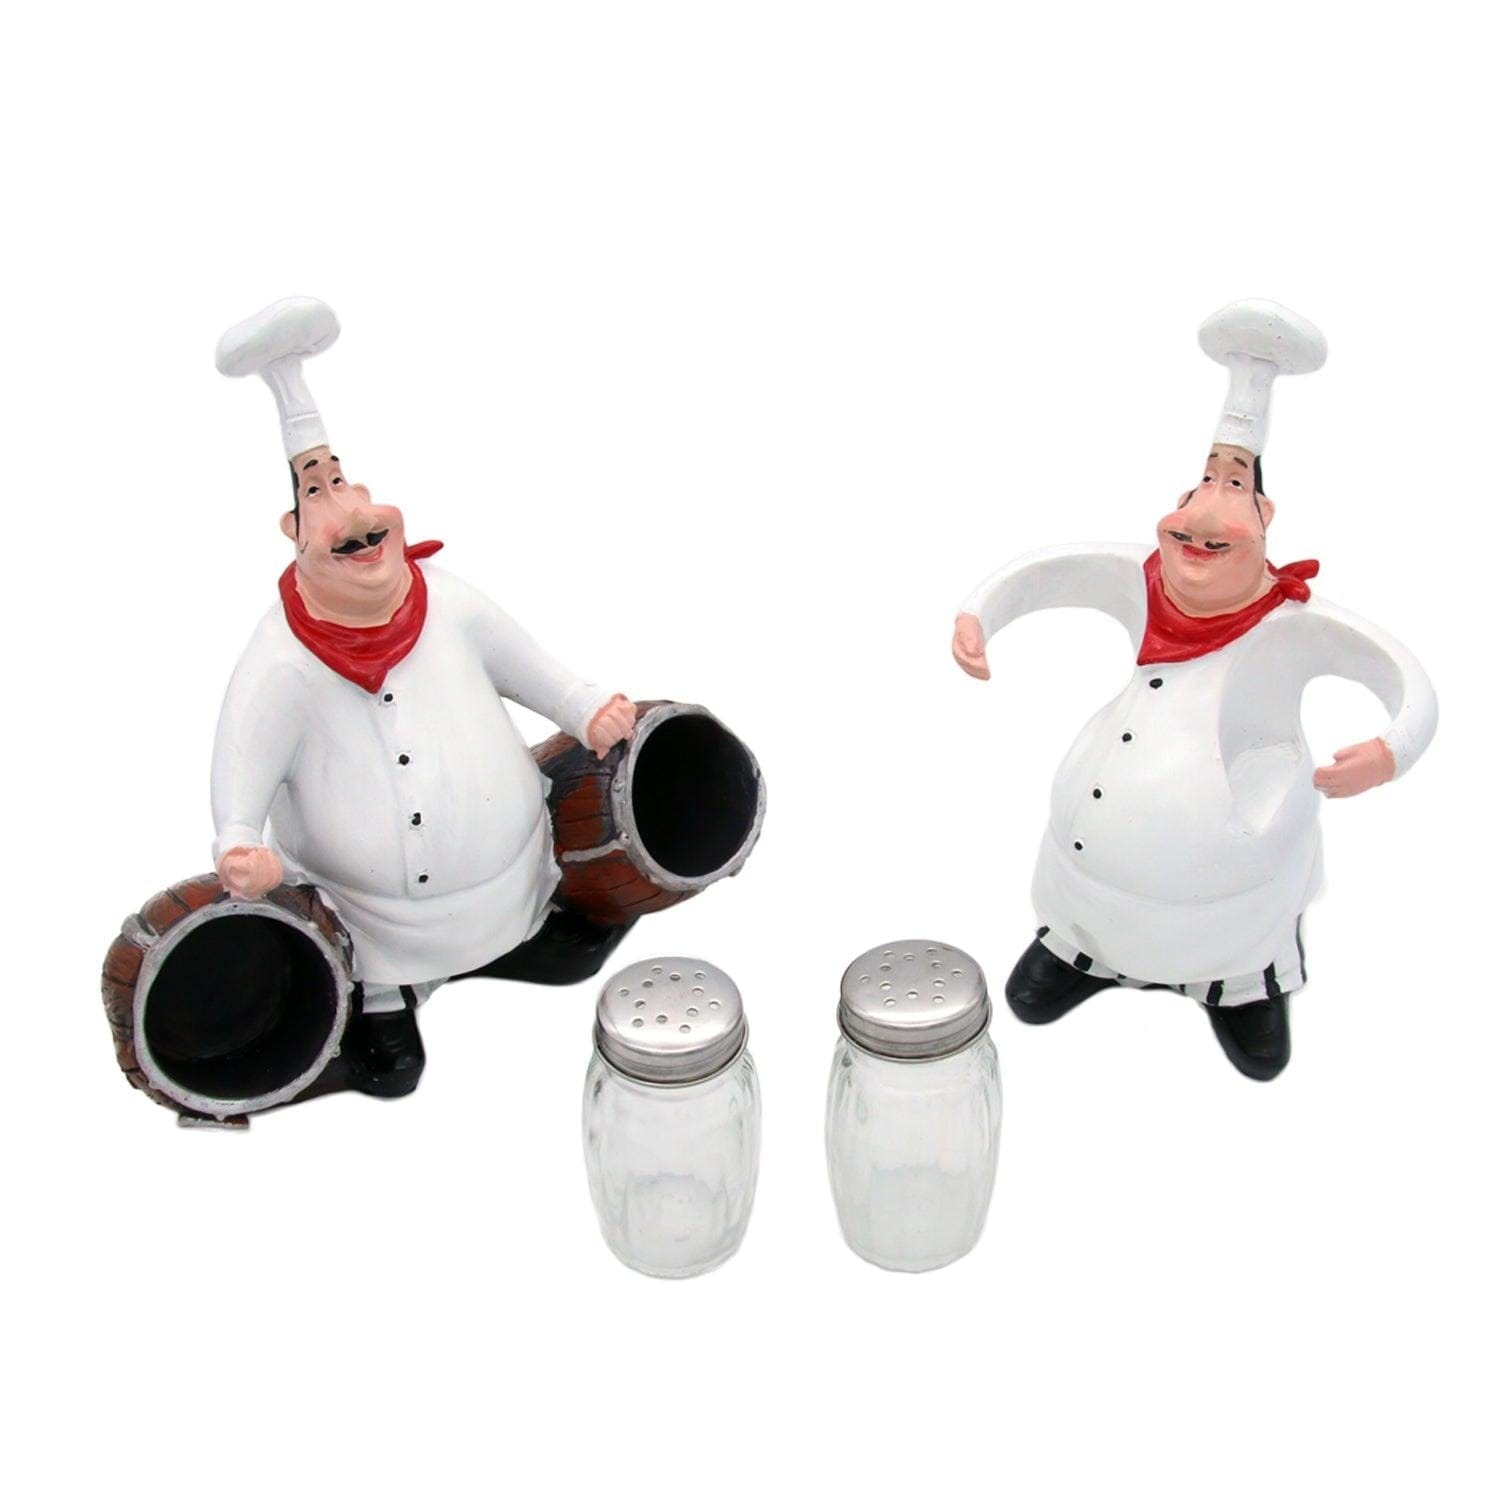 Foodie Chefs Figurine Complementing Resin Salt & Pepper Shakers Holders Complementing Set (Big)